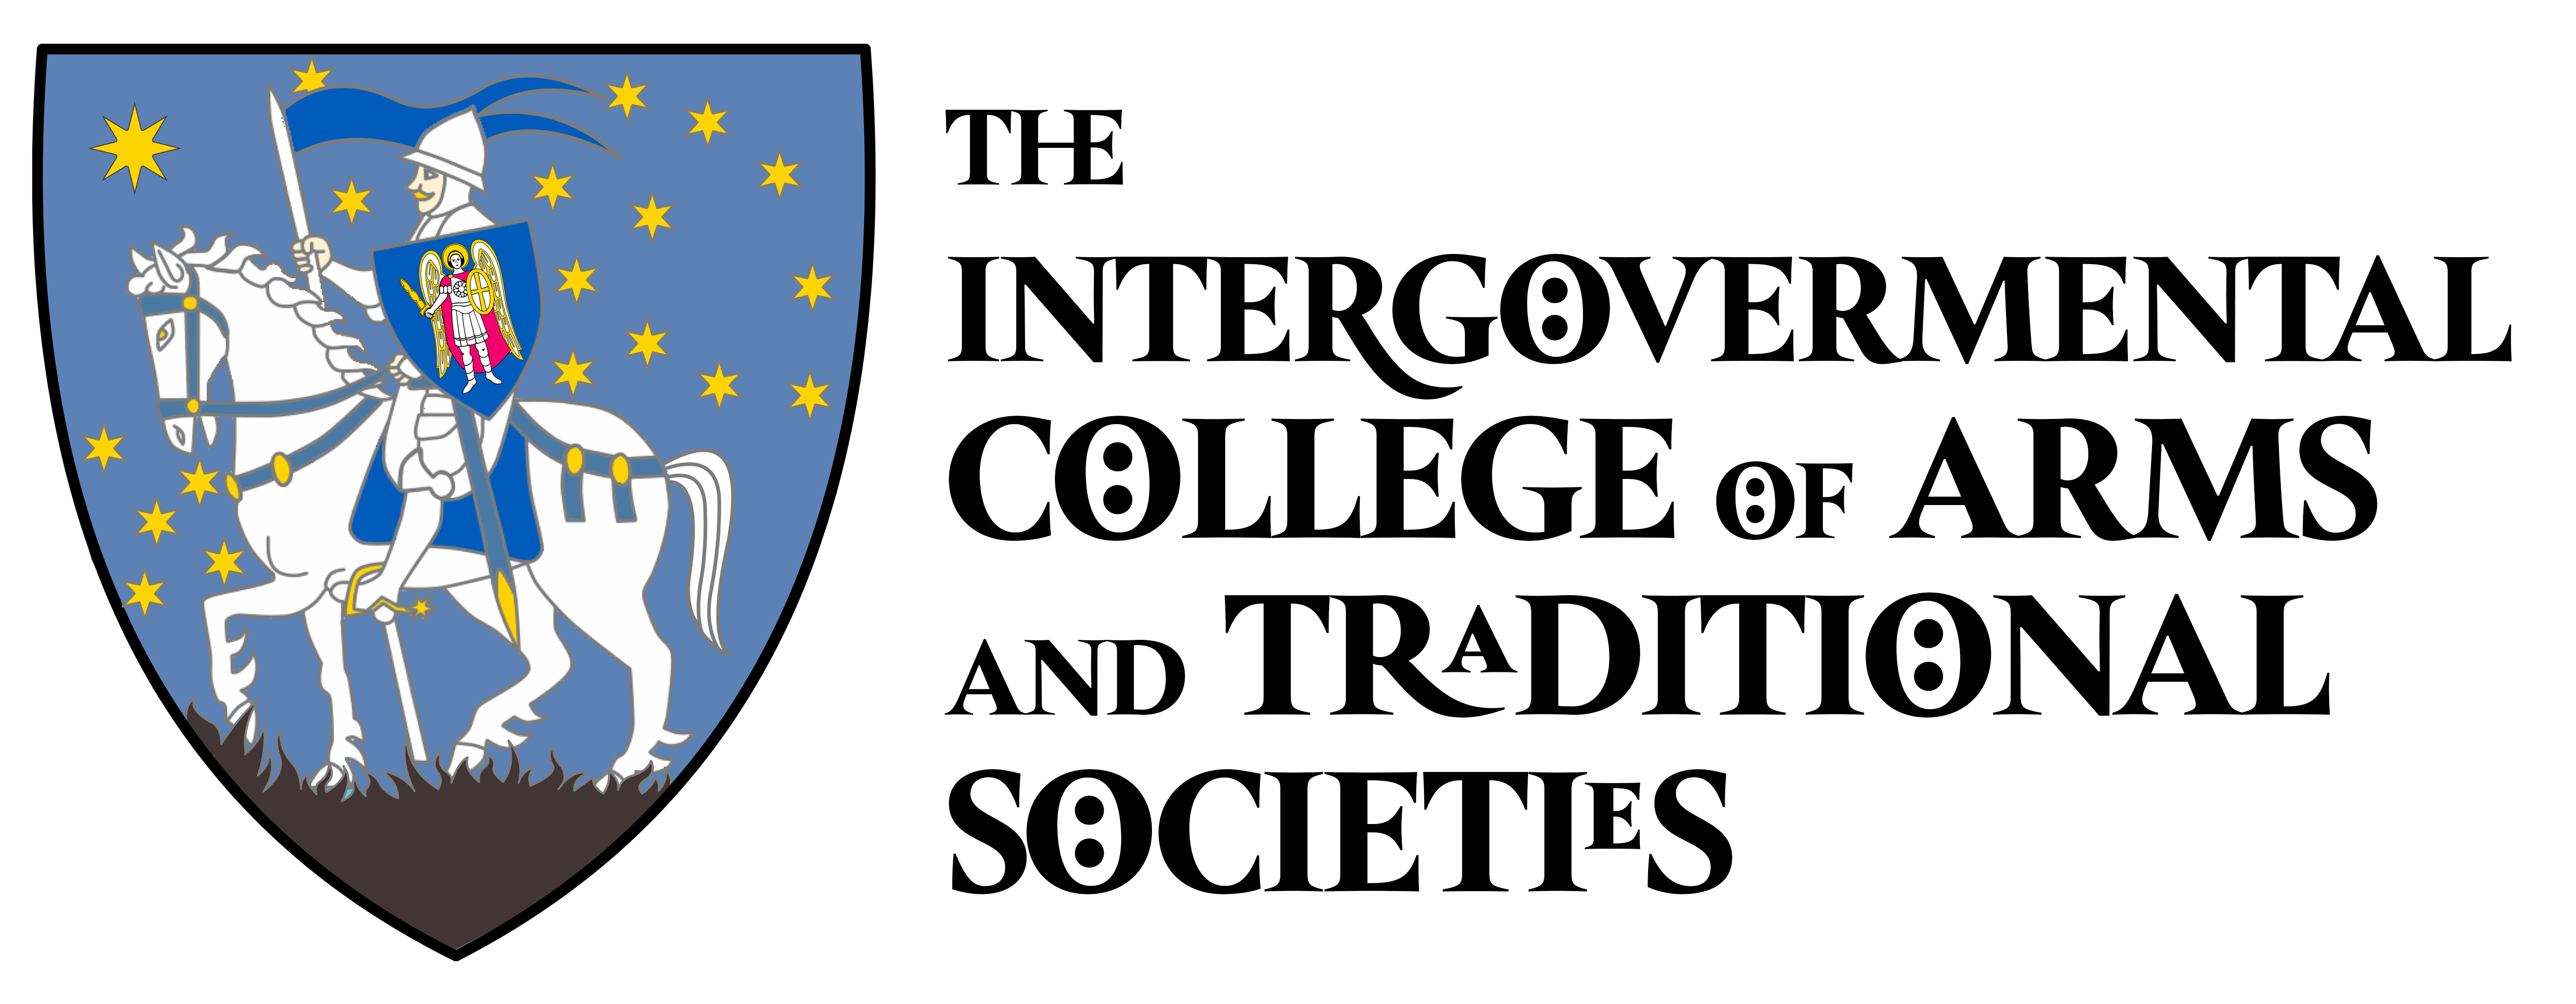 The Intergovernmental College of Arms and Traditional Cultures